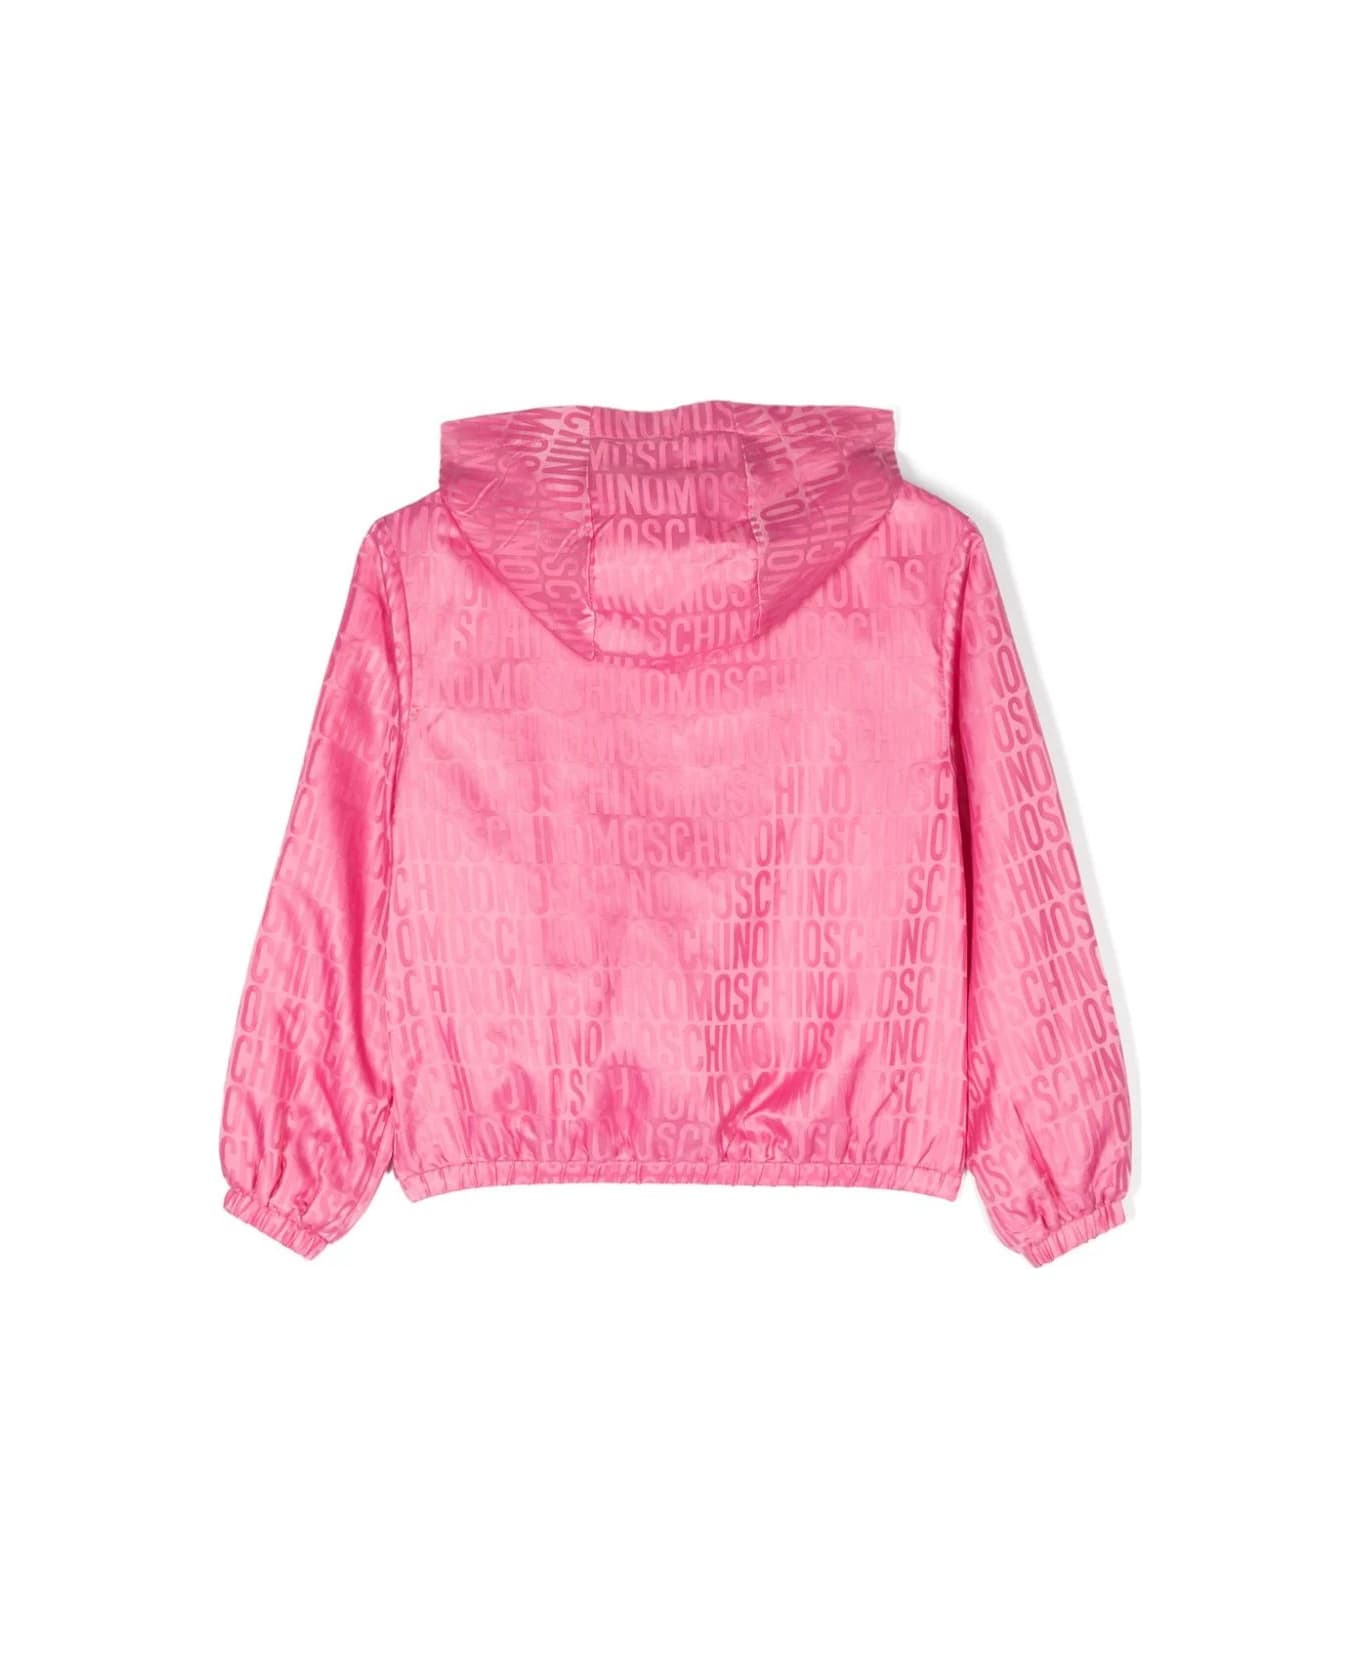 Moschino Pink Windbreaker Jacket With All-over Jacquard Logo - Pink